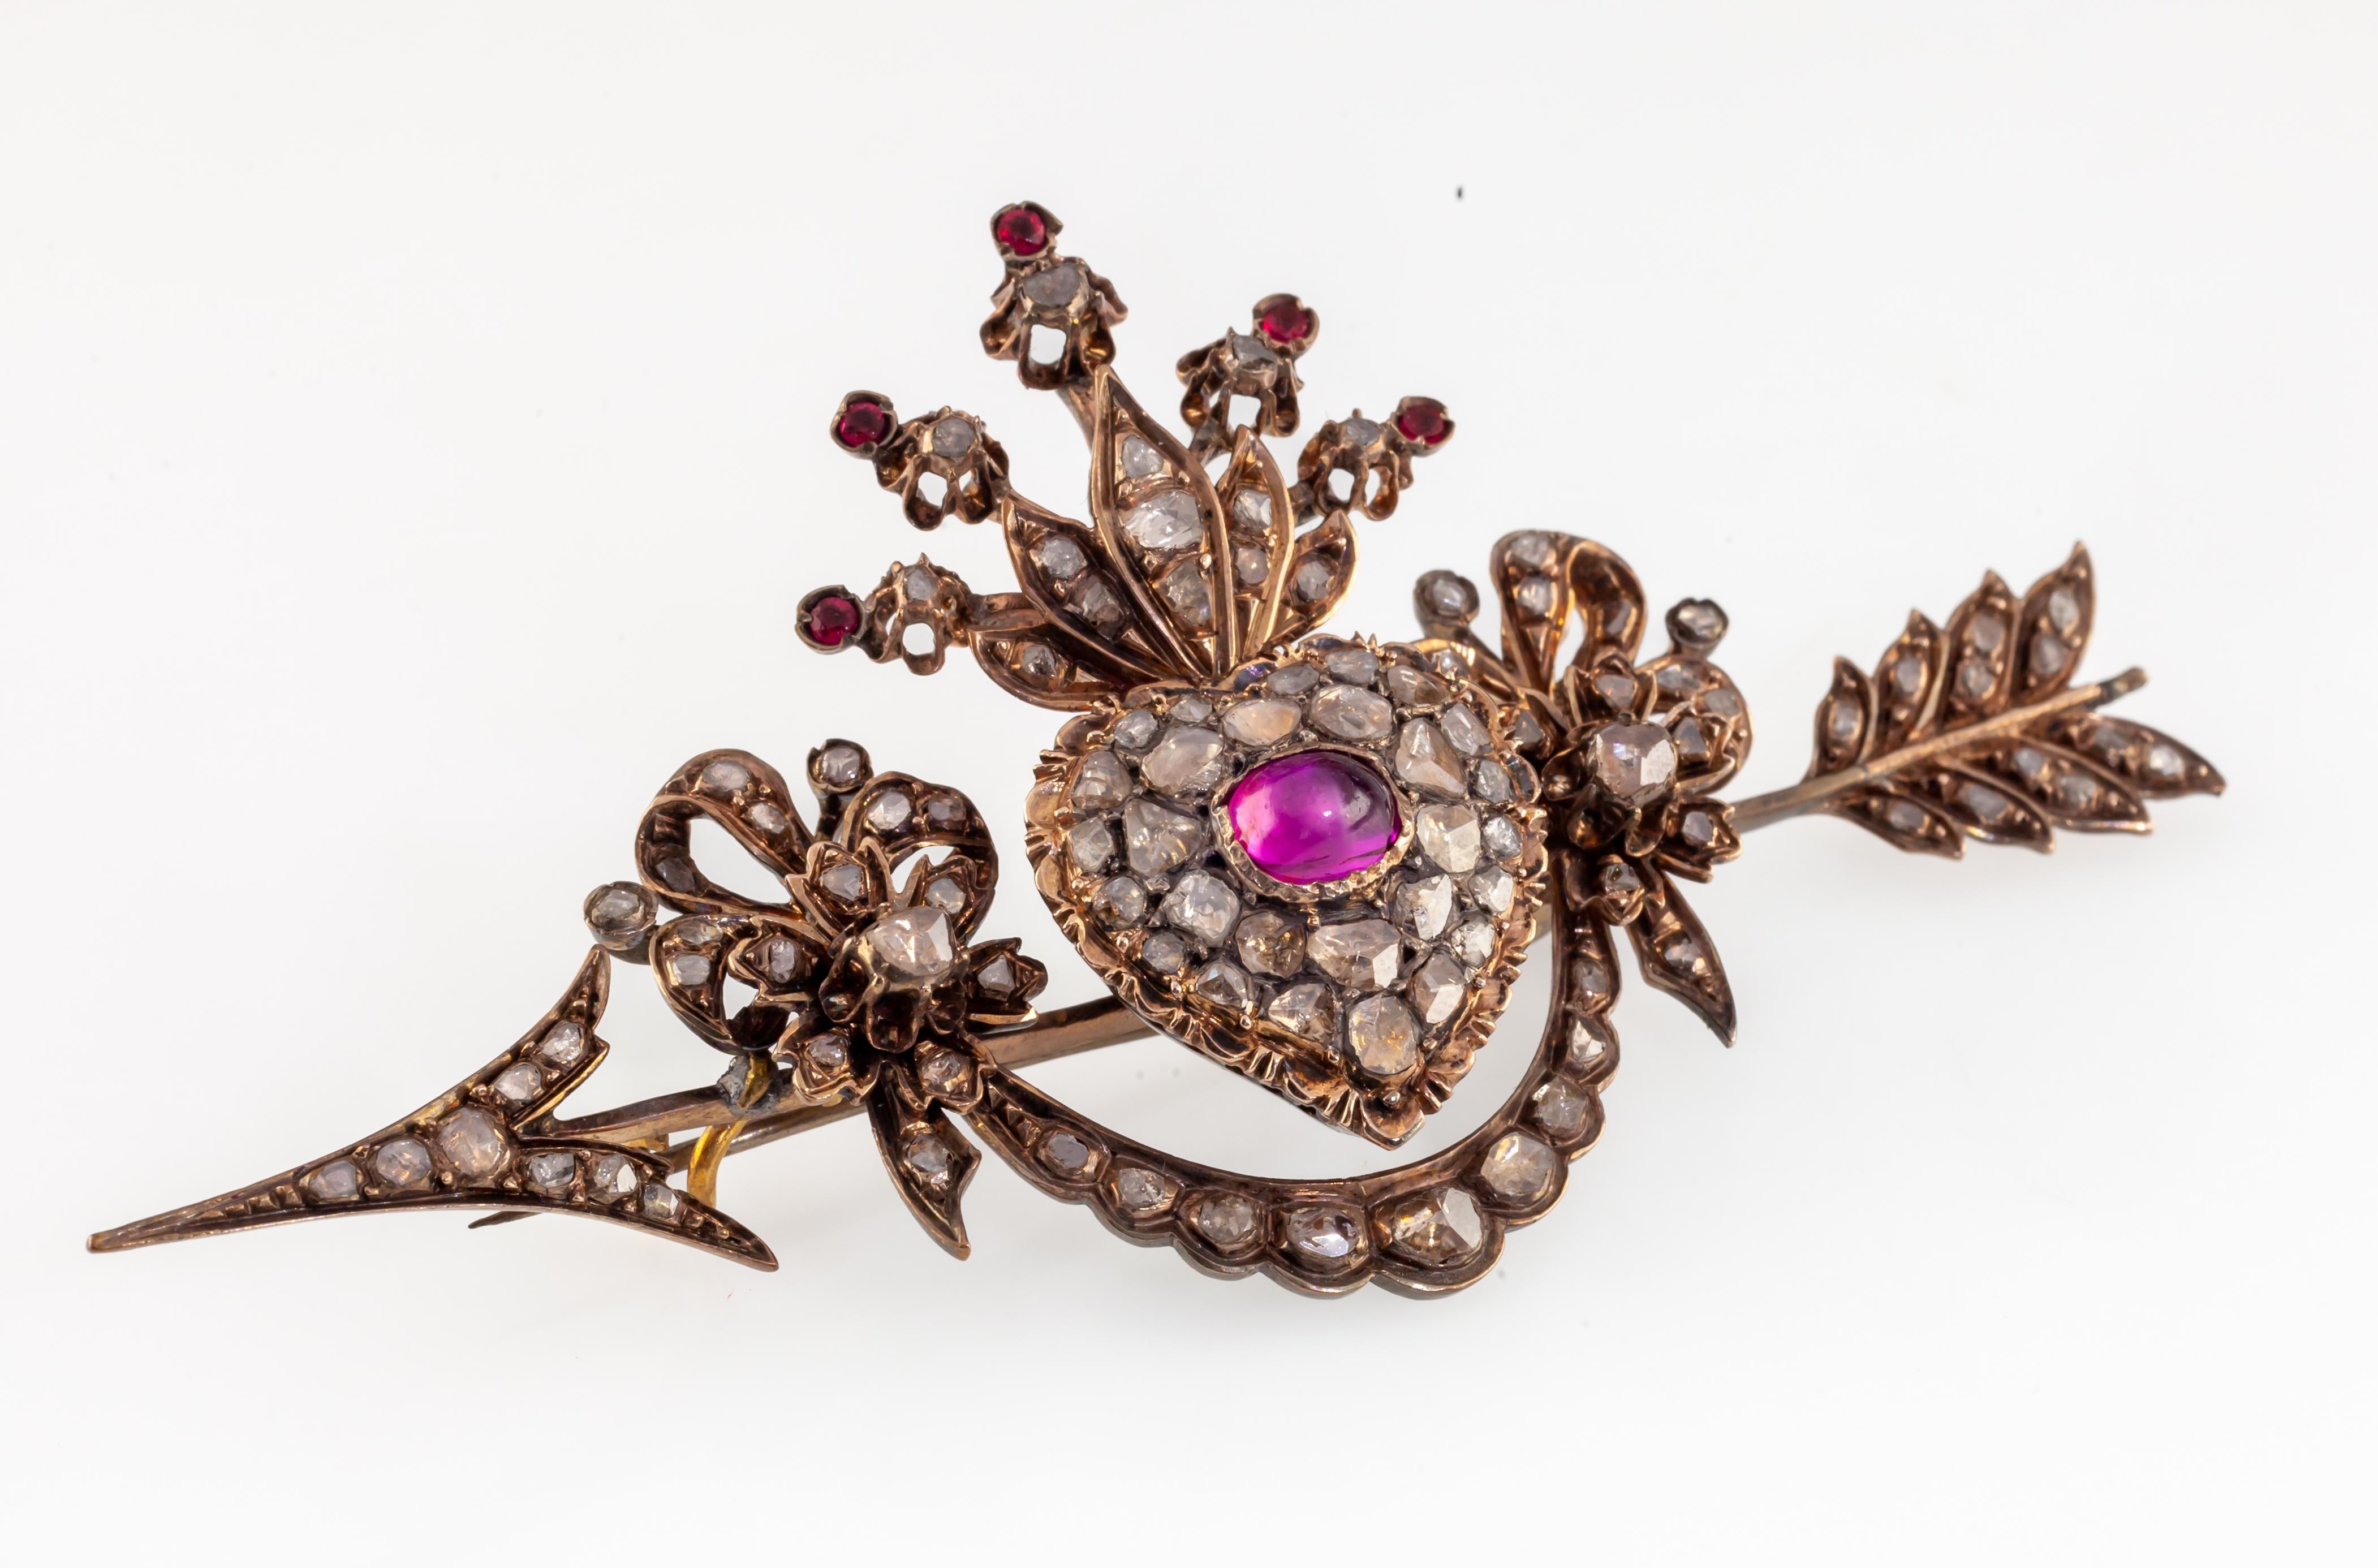 10k Gold Custom Antique Heart Arrow Brooch w/ Diamonds and Rubies
Gorgeous Antique Brooch
Features Garland with Bow Detailing on Arrow with Crowned Heart
Ruby Cabochon Centerpiece with Old Cut Diamonds
Length of Brooch = 47 mm
Width of Brooch = 90